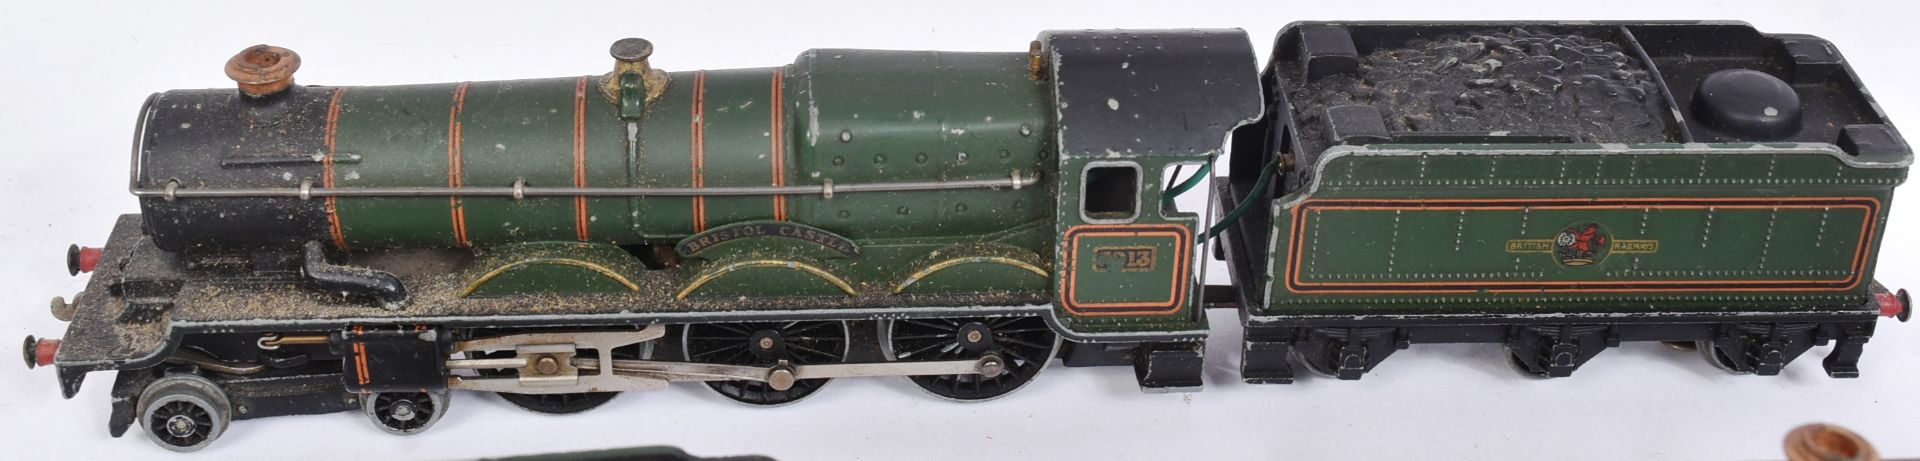 COLLECTION OF ASSORTED HORNBY DUBLO MODEL RAILWAY TRAINSET LOCOMOTIVE ENGINES - Image 5 of 5